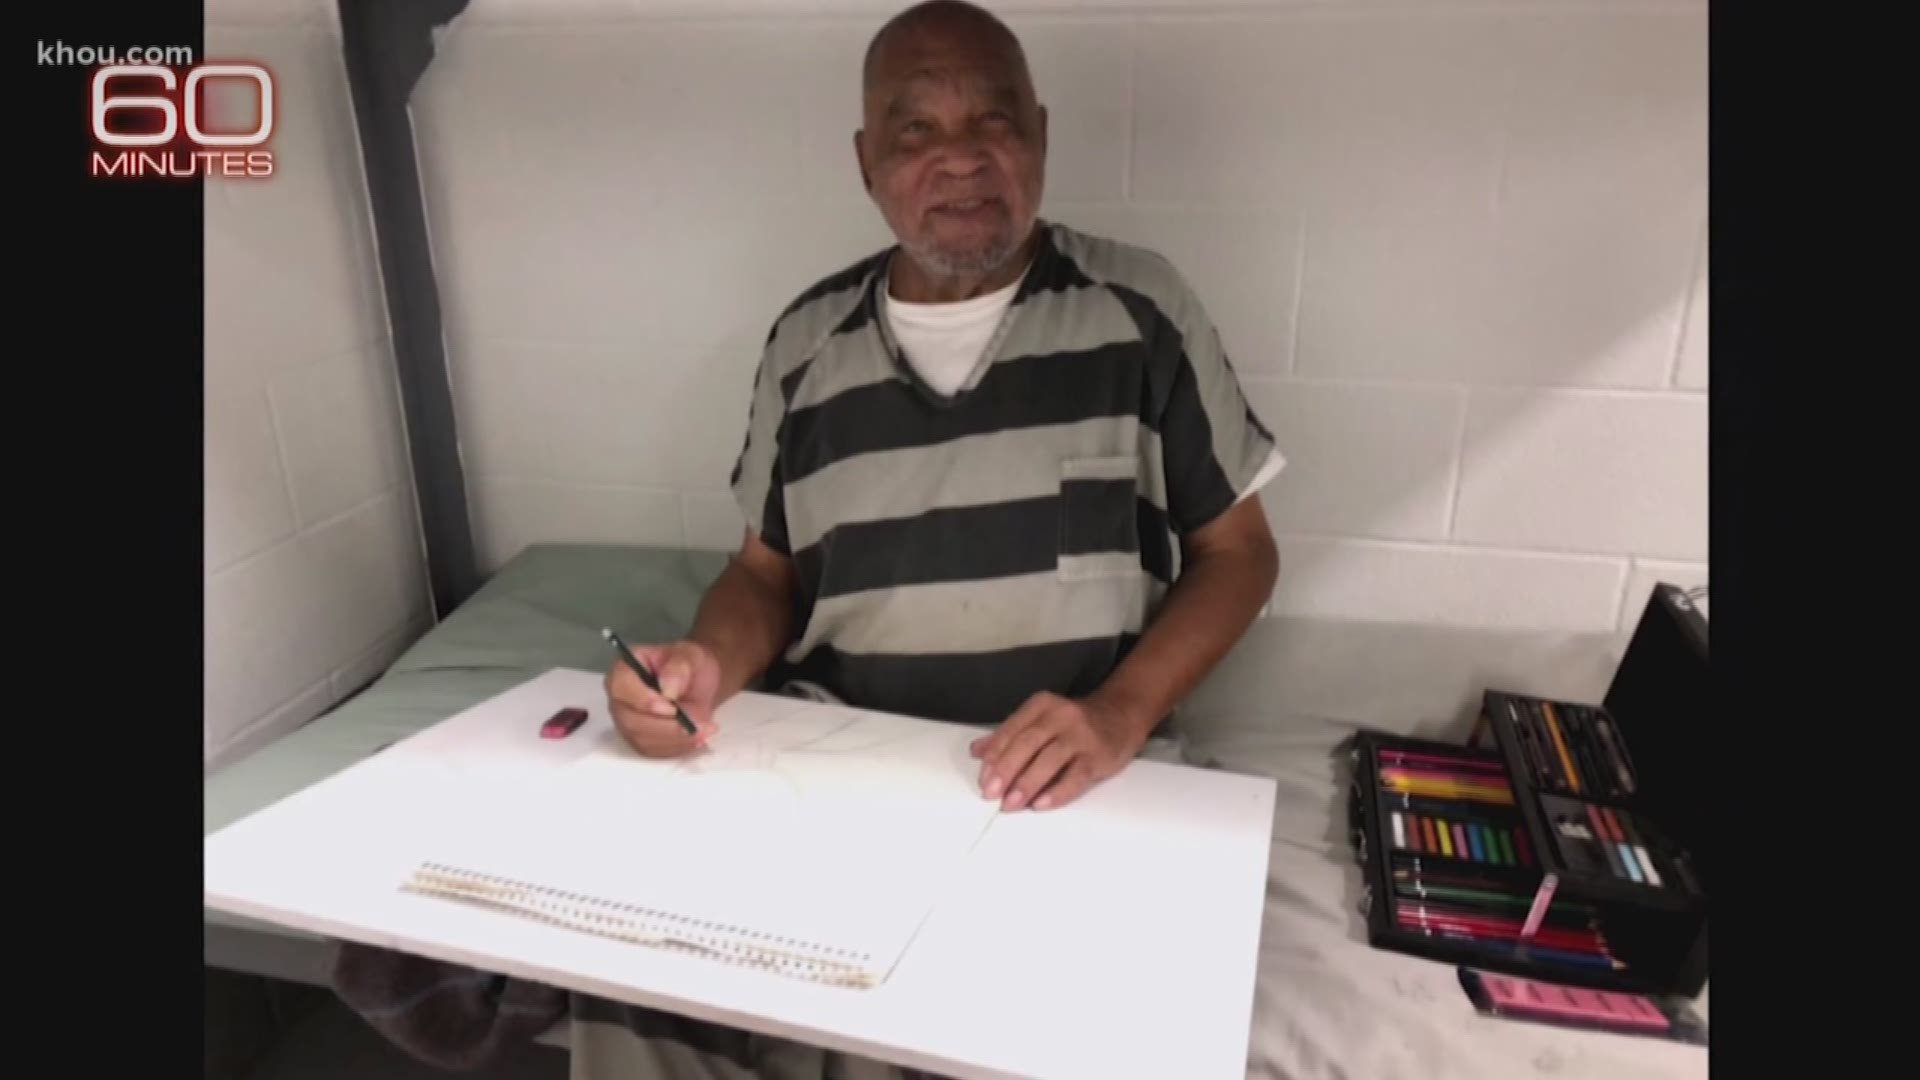 Samuel Little, who has been behind bars since 2012, told investigators last year that he was responsible for about 90 killings nationwide between 1970 and 2005.